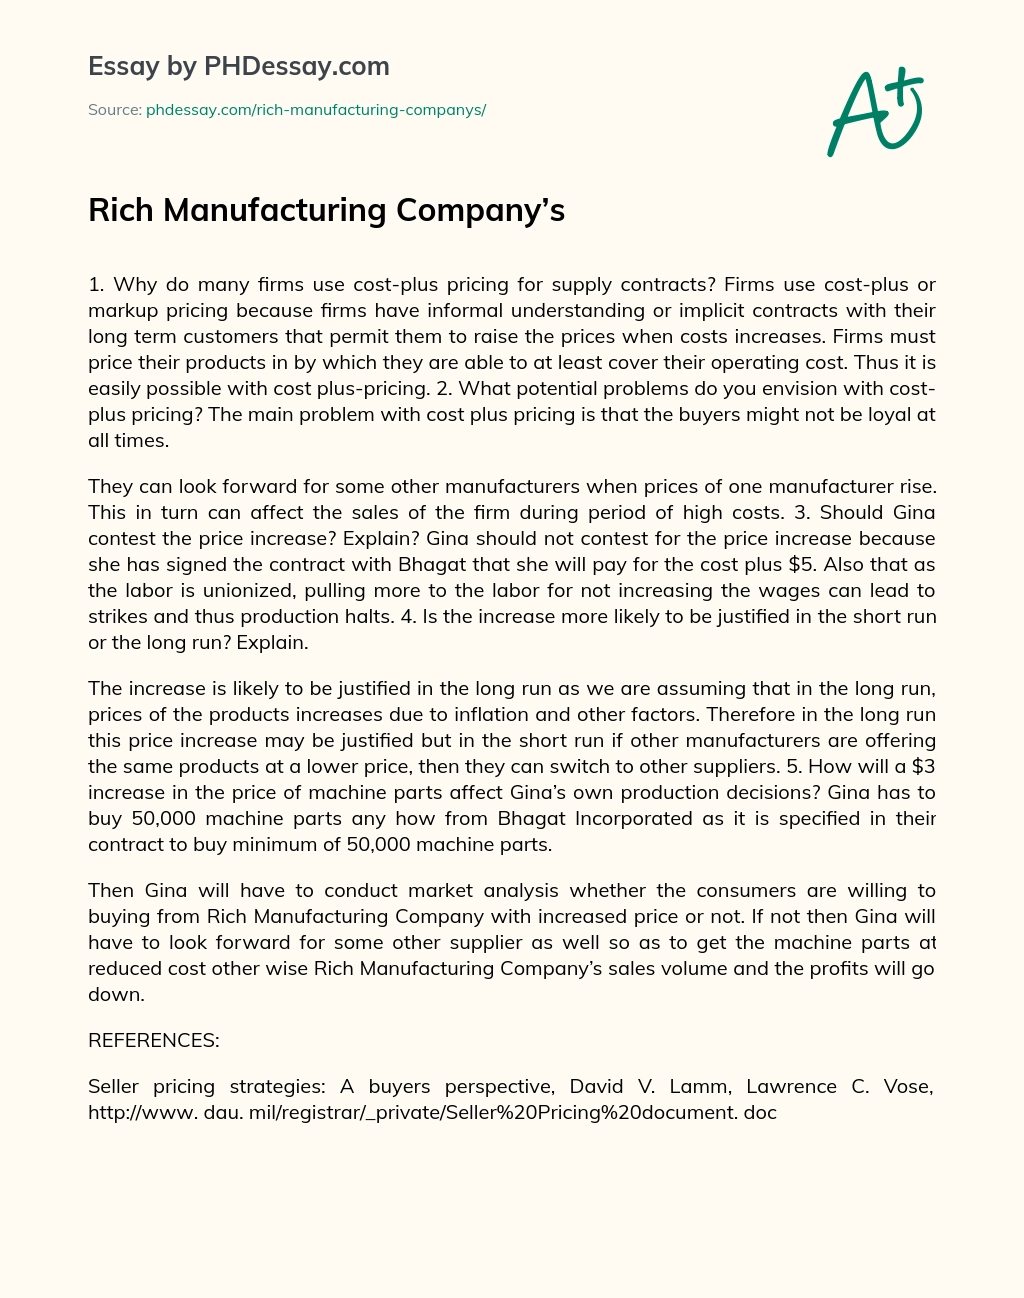 Rich Manufacturing Company’s essay